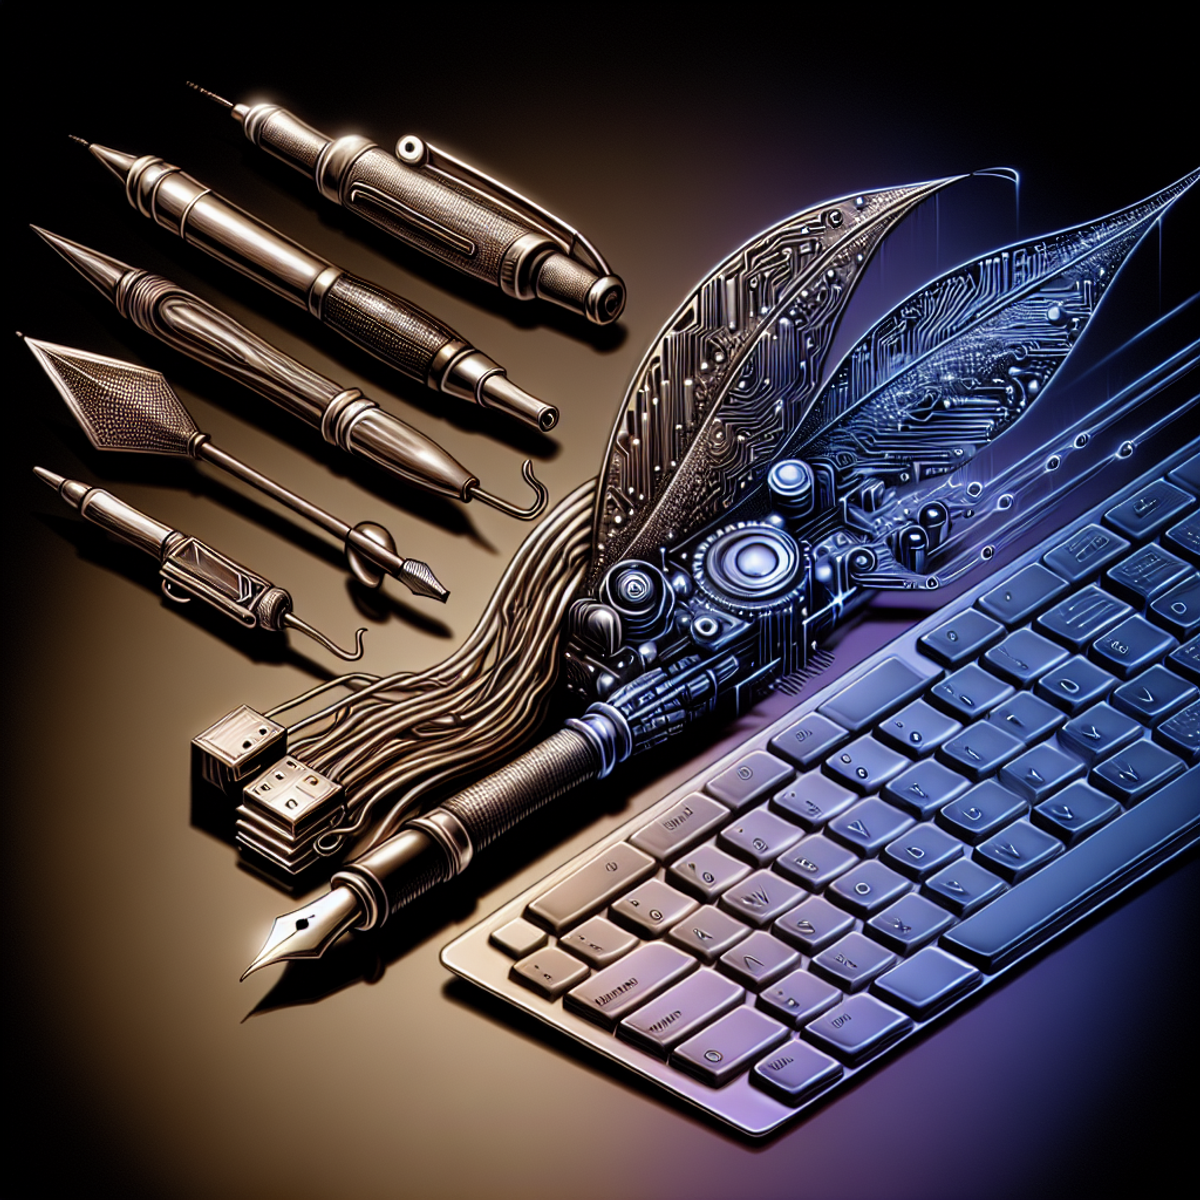 Evolution of writing tools from pen to keyboard represented through visual symbols.